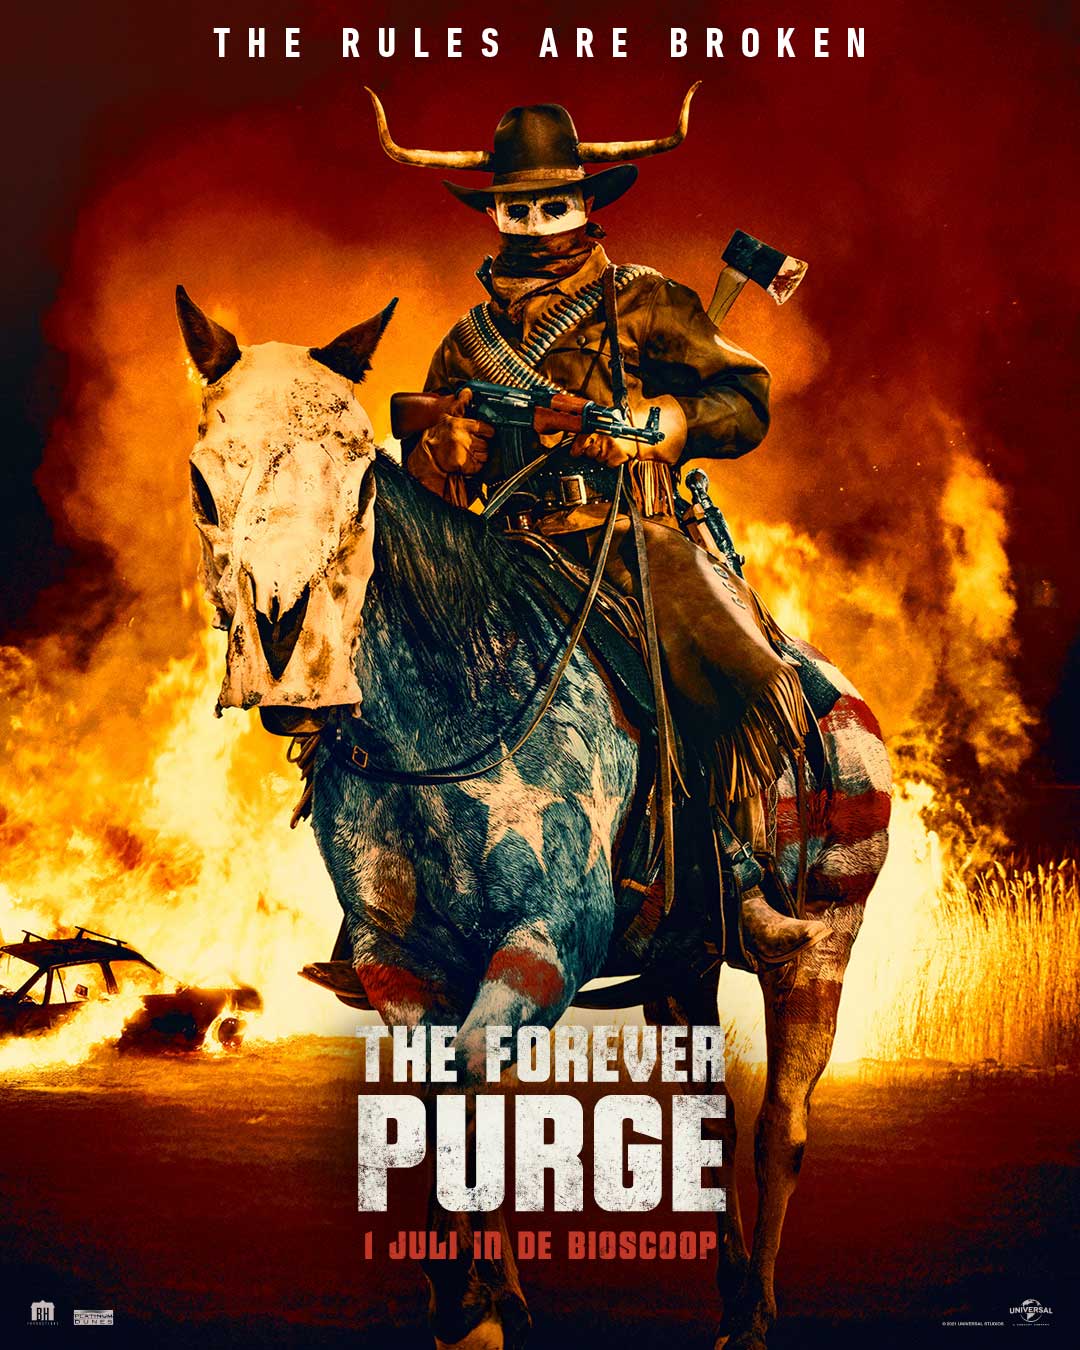 Trailer The Forever Purge - All rules are broken